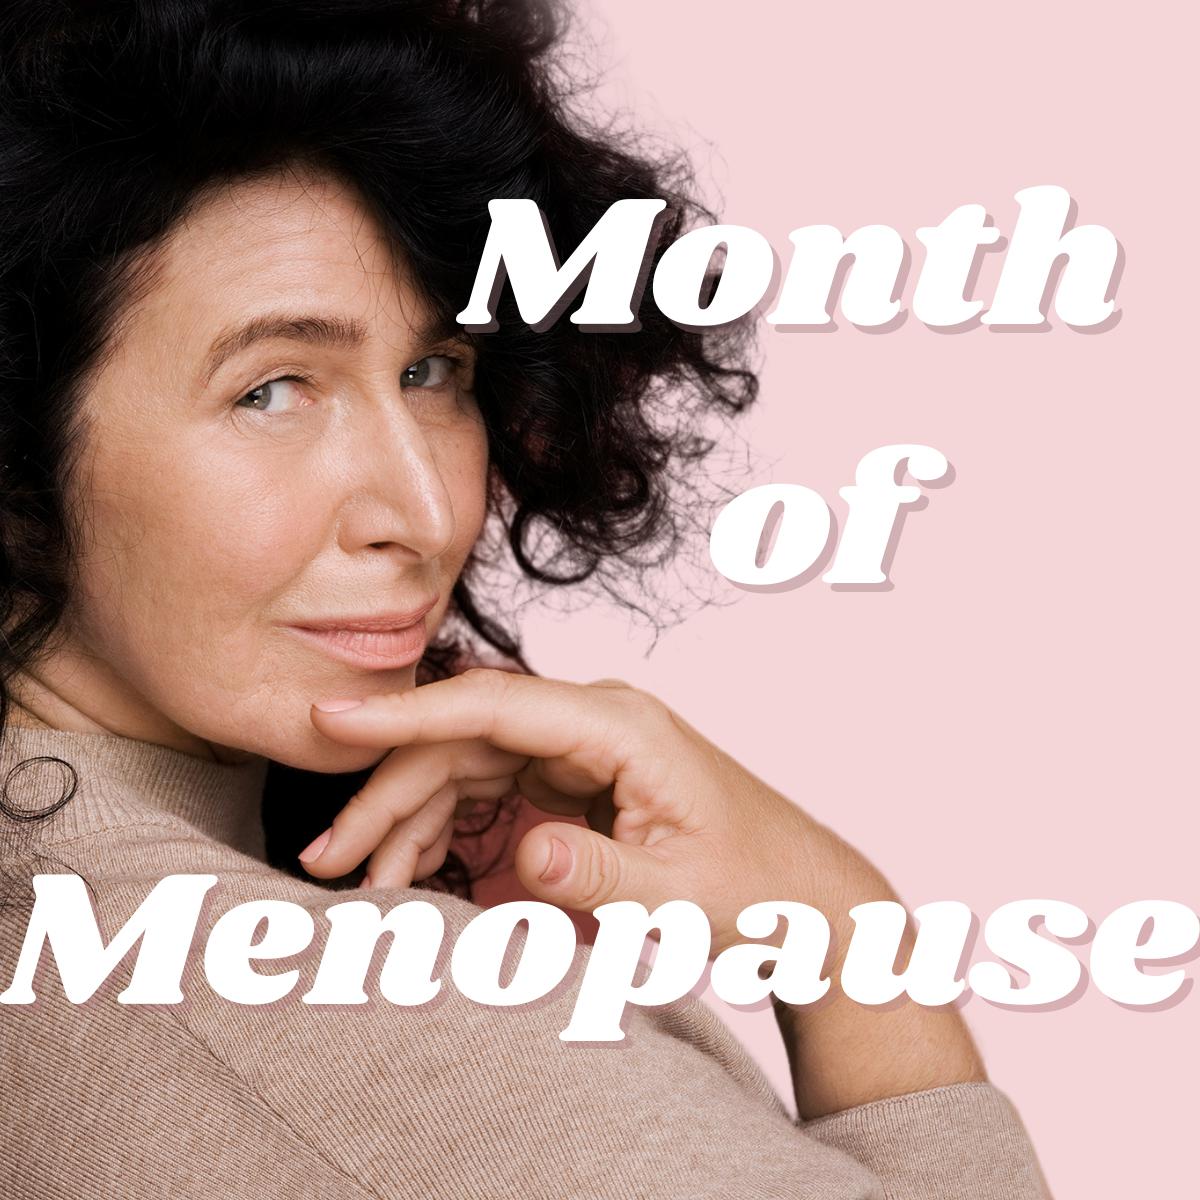 The Month of Menopause